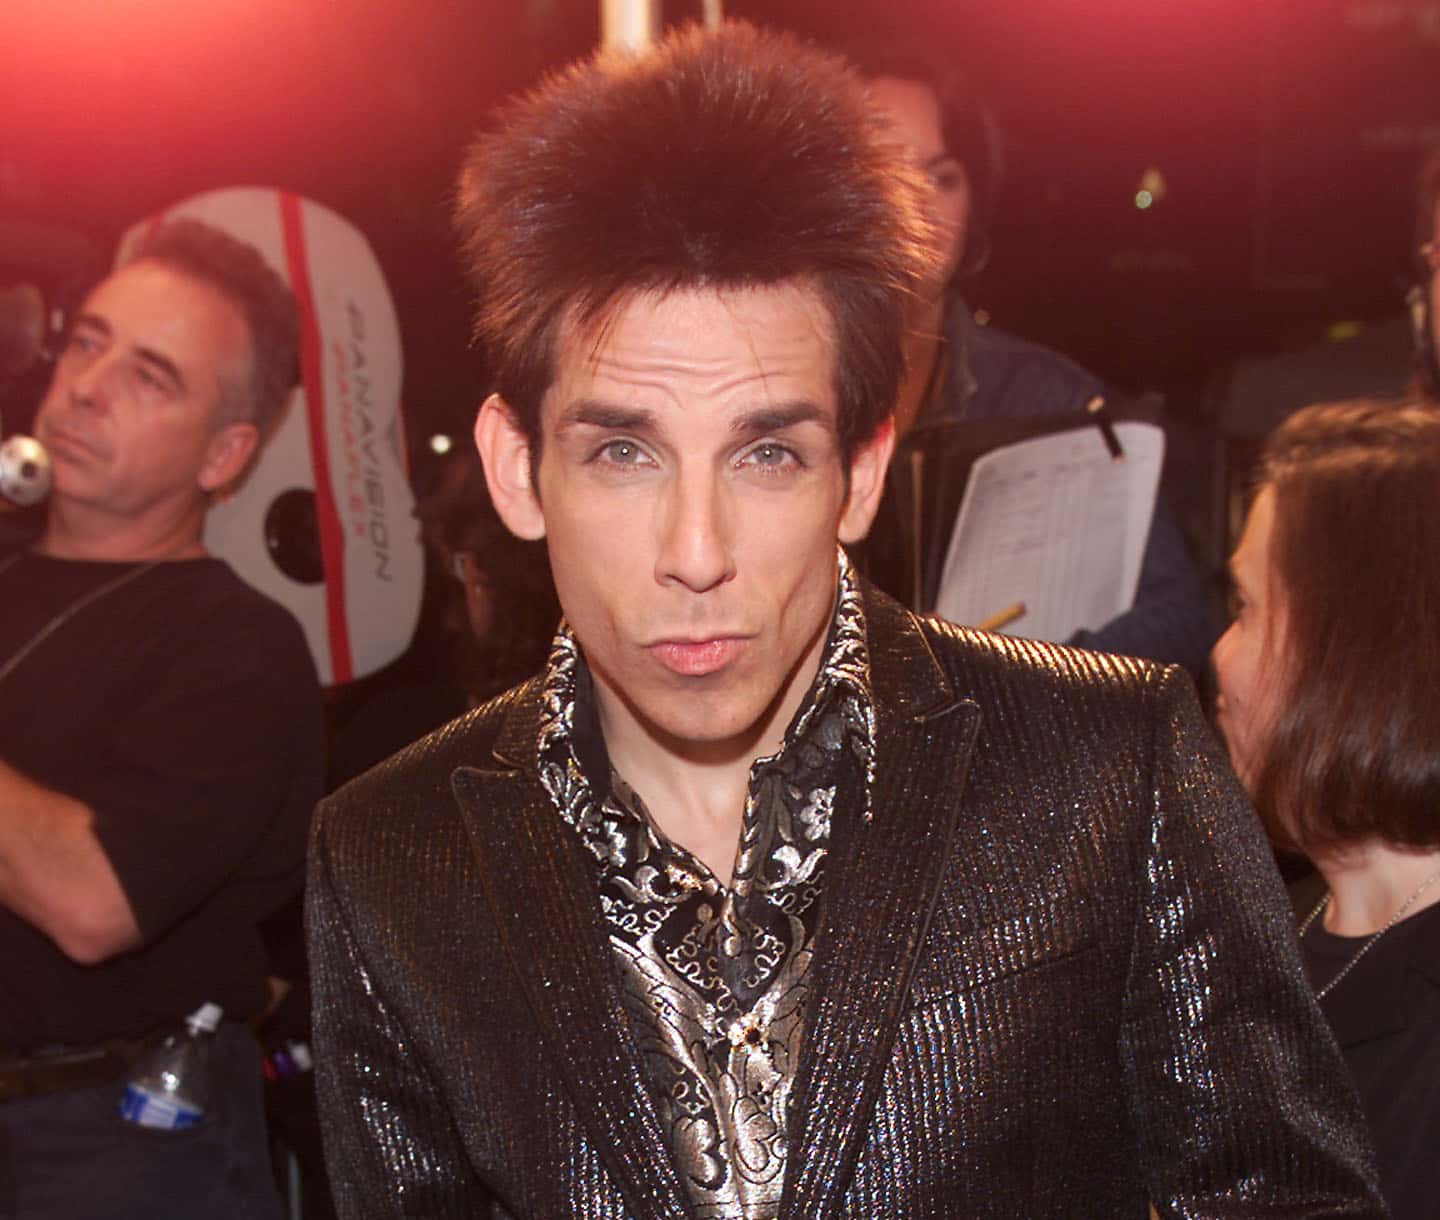 32 Ridiculously Good Looking Facts About Zoolander